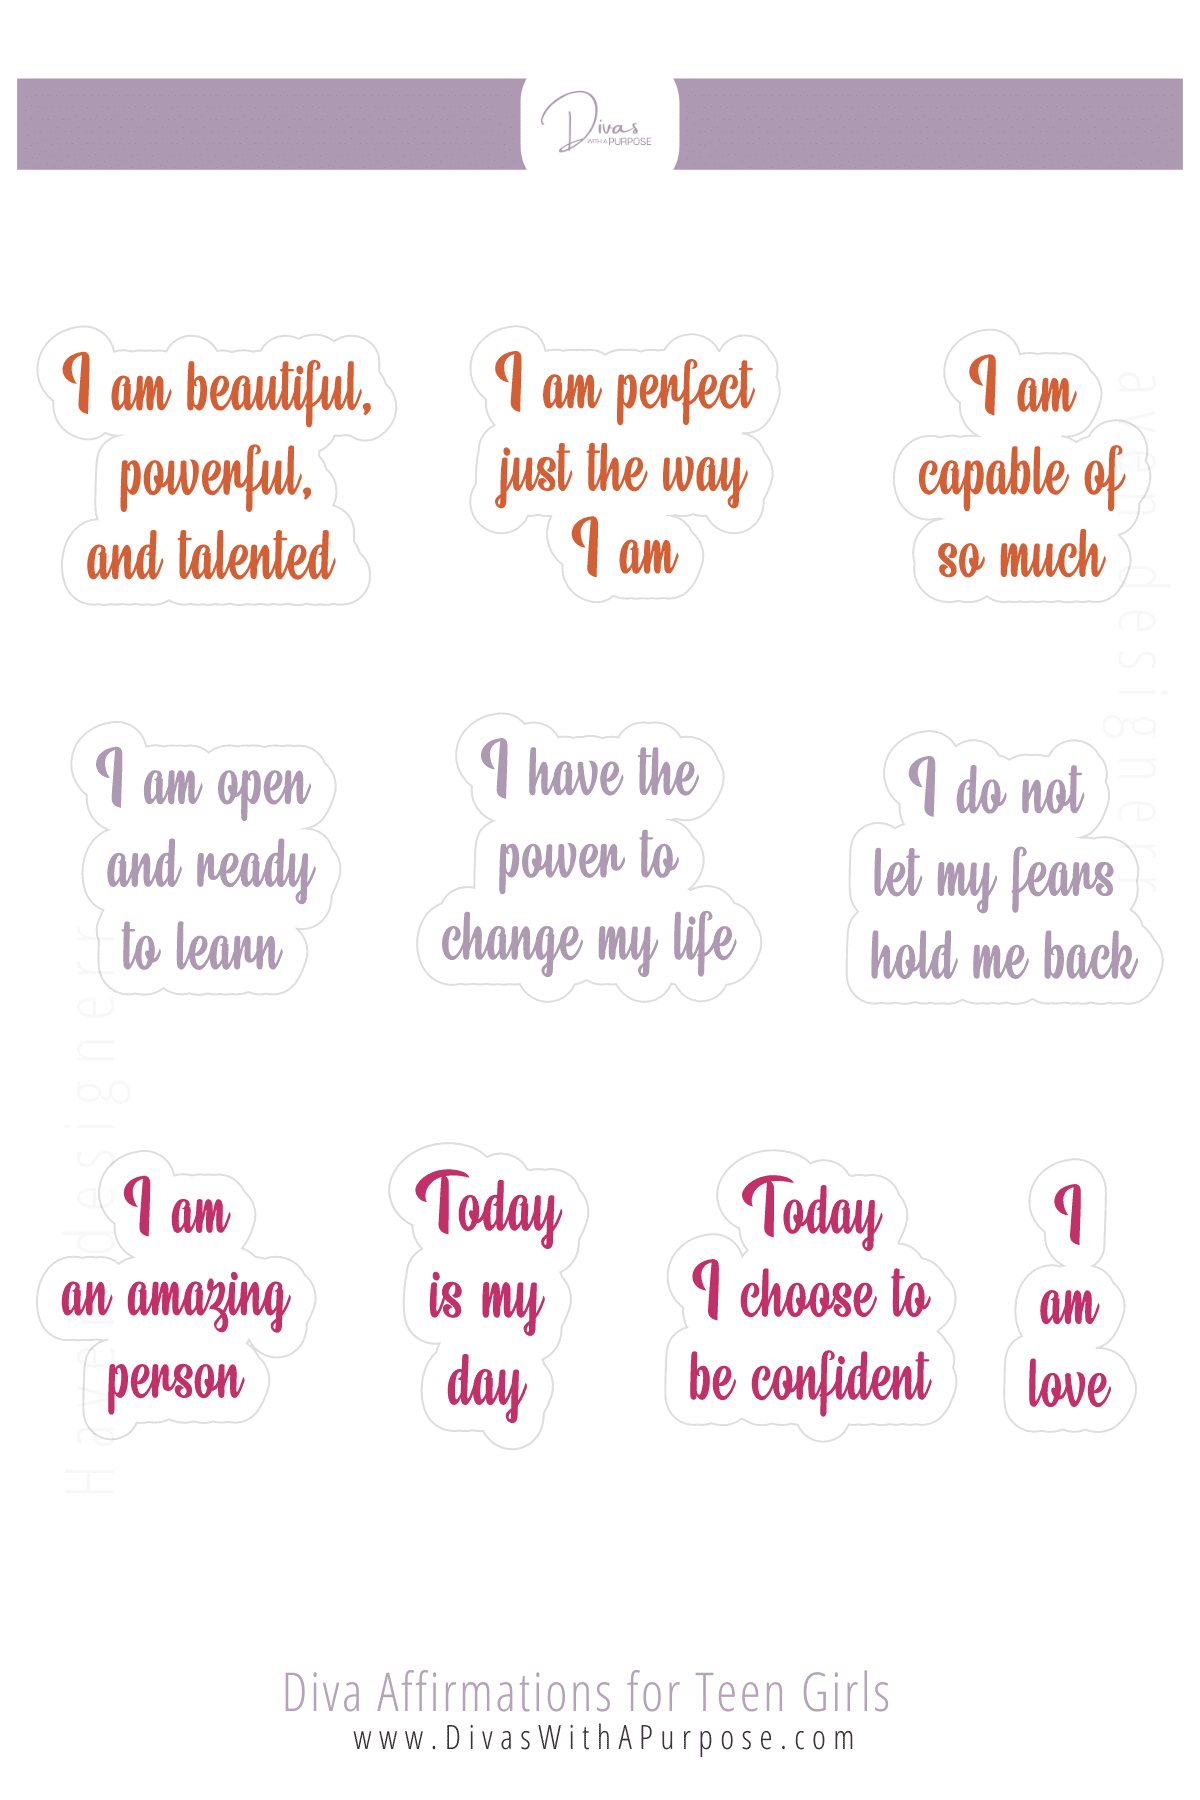 Mind over matter mantra stickers, positive affirmation stickers